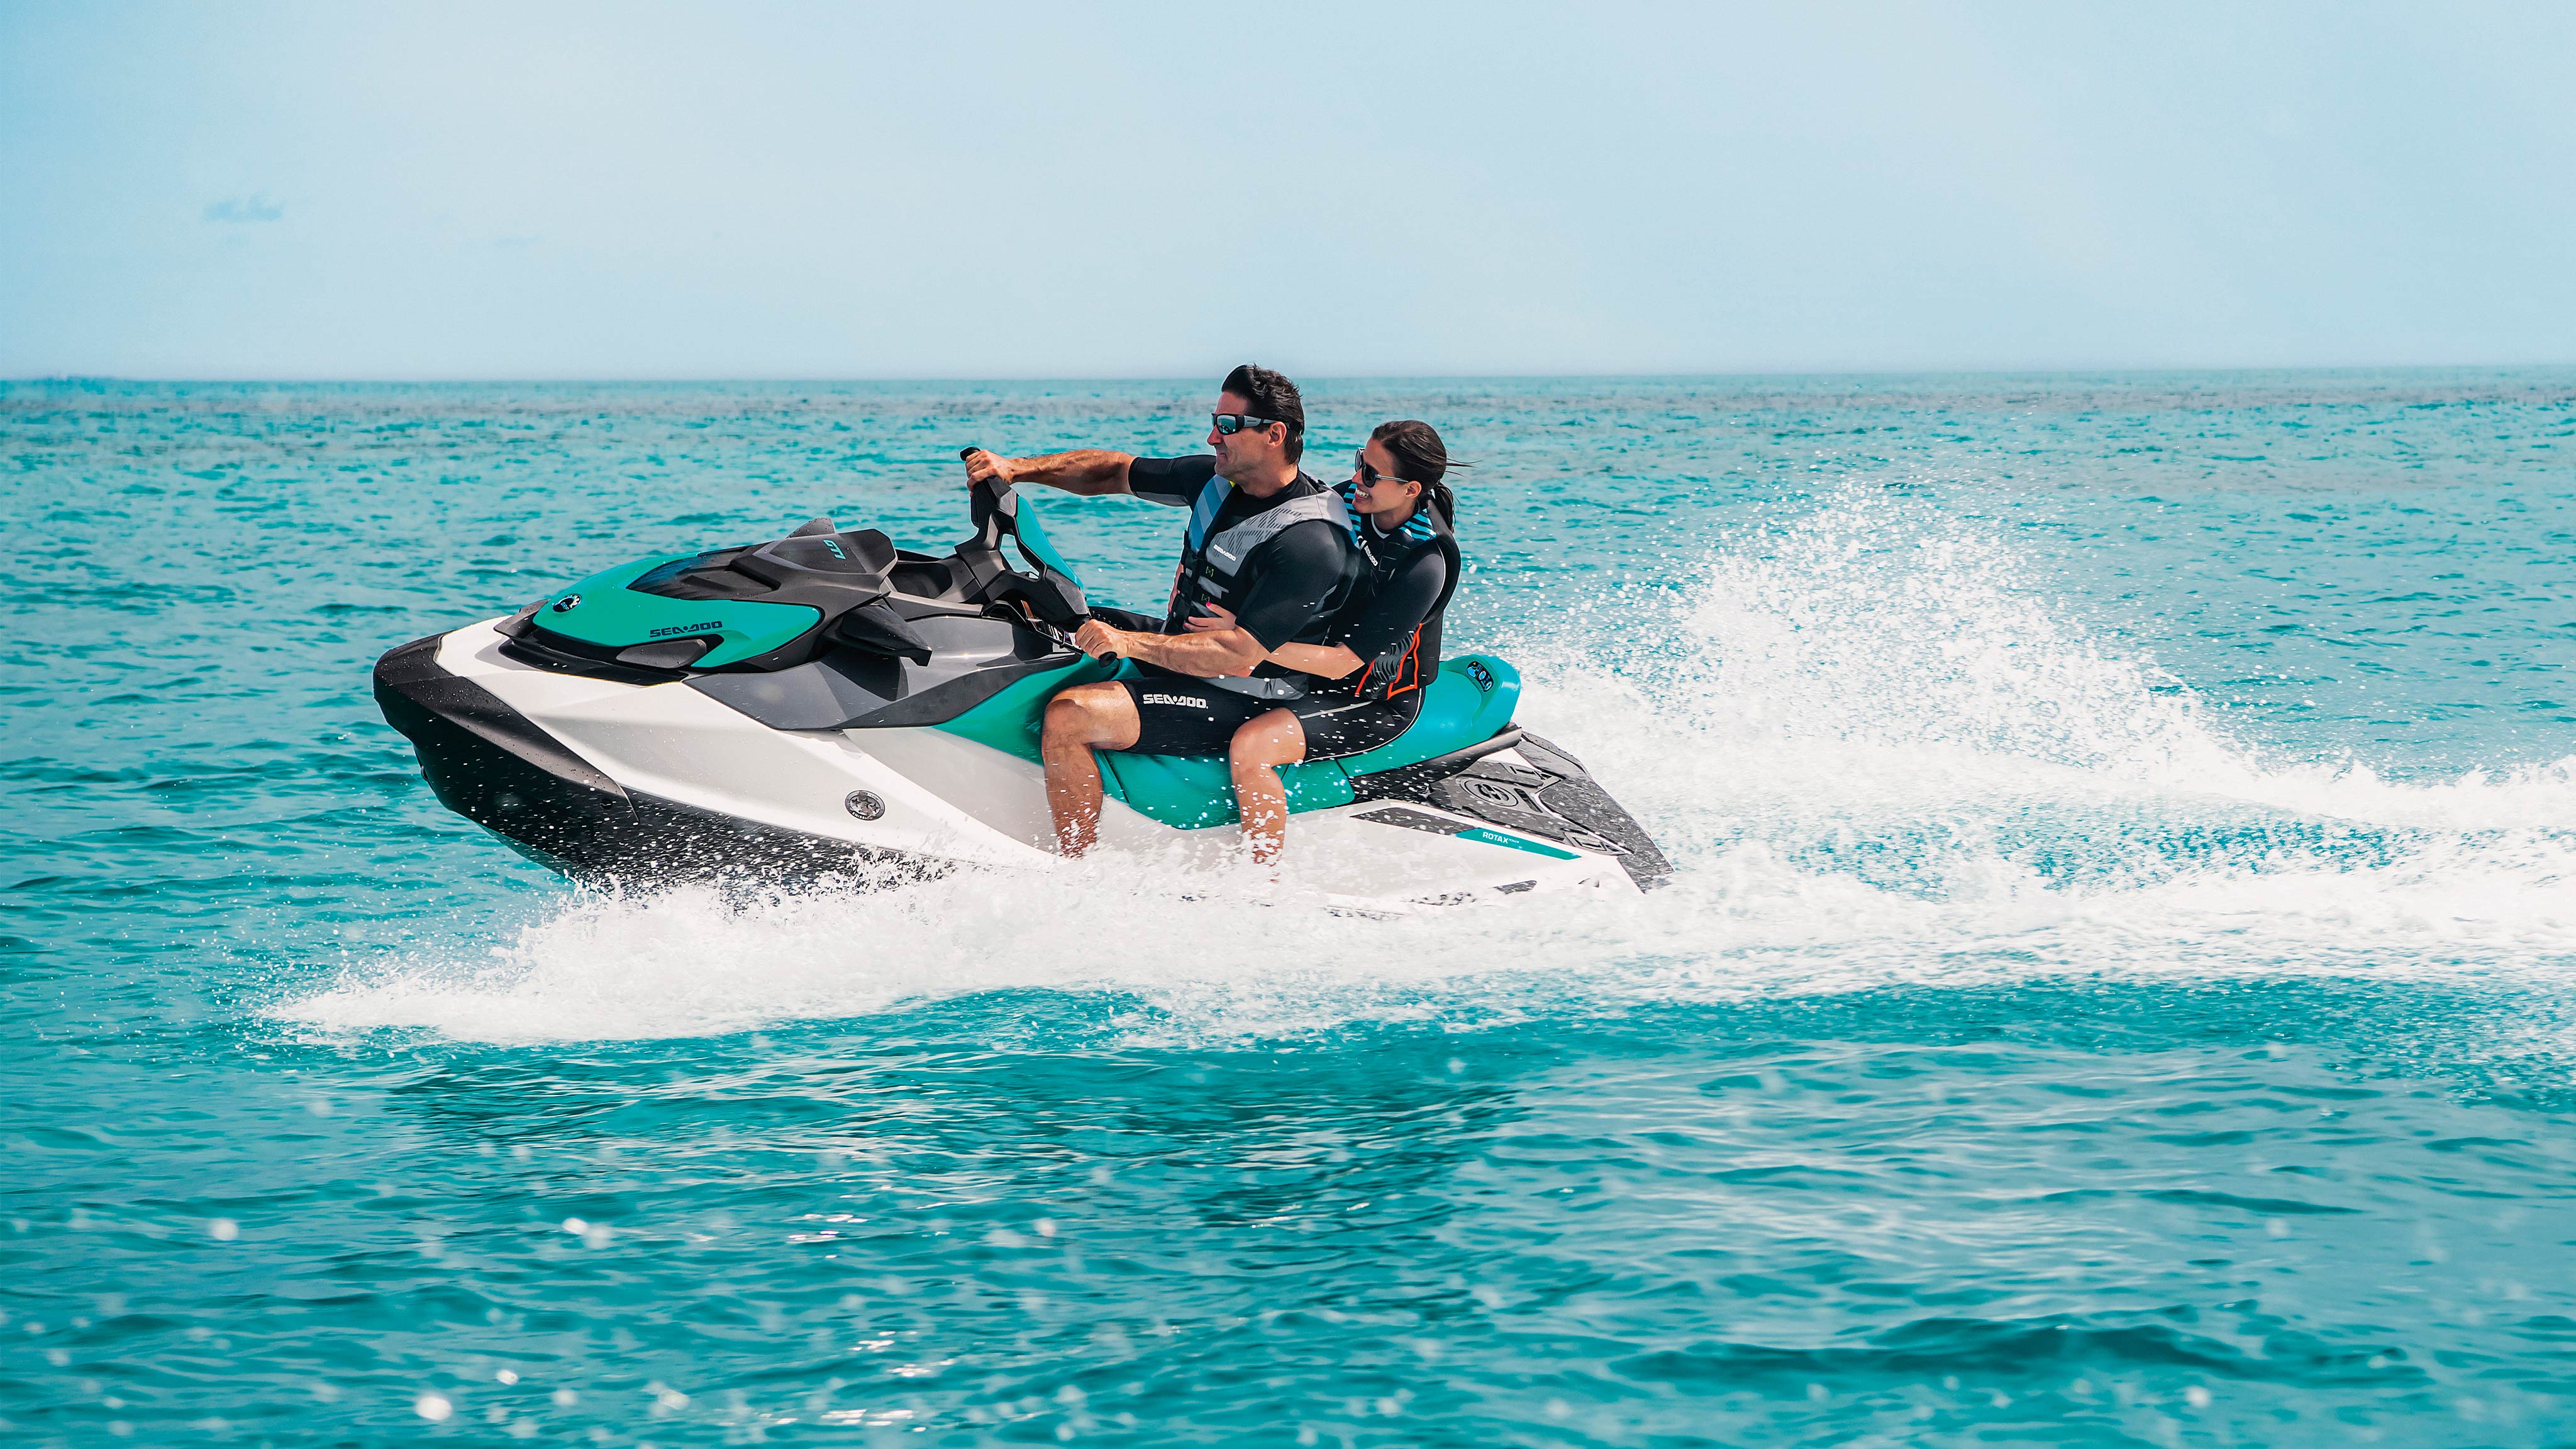 A couple riding on the Sea-Doo GTI